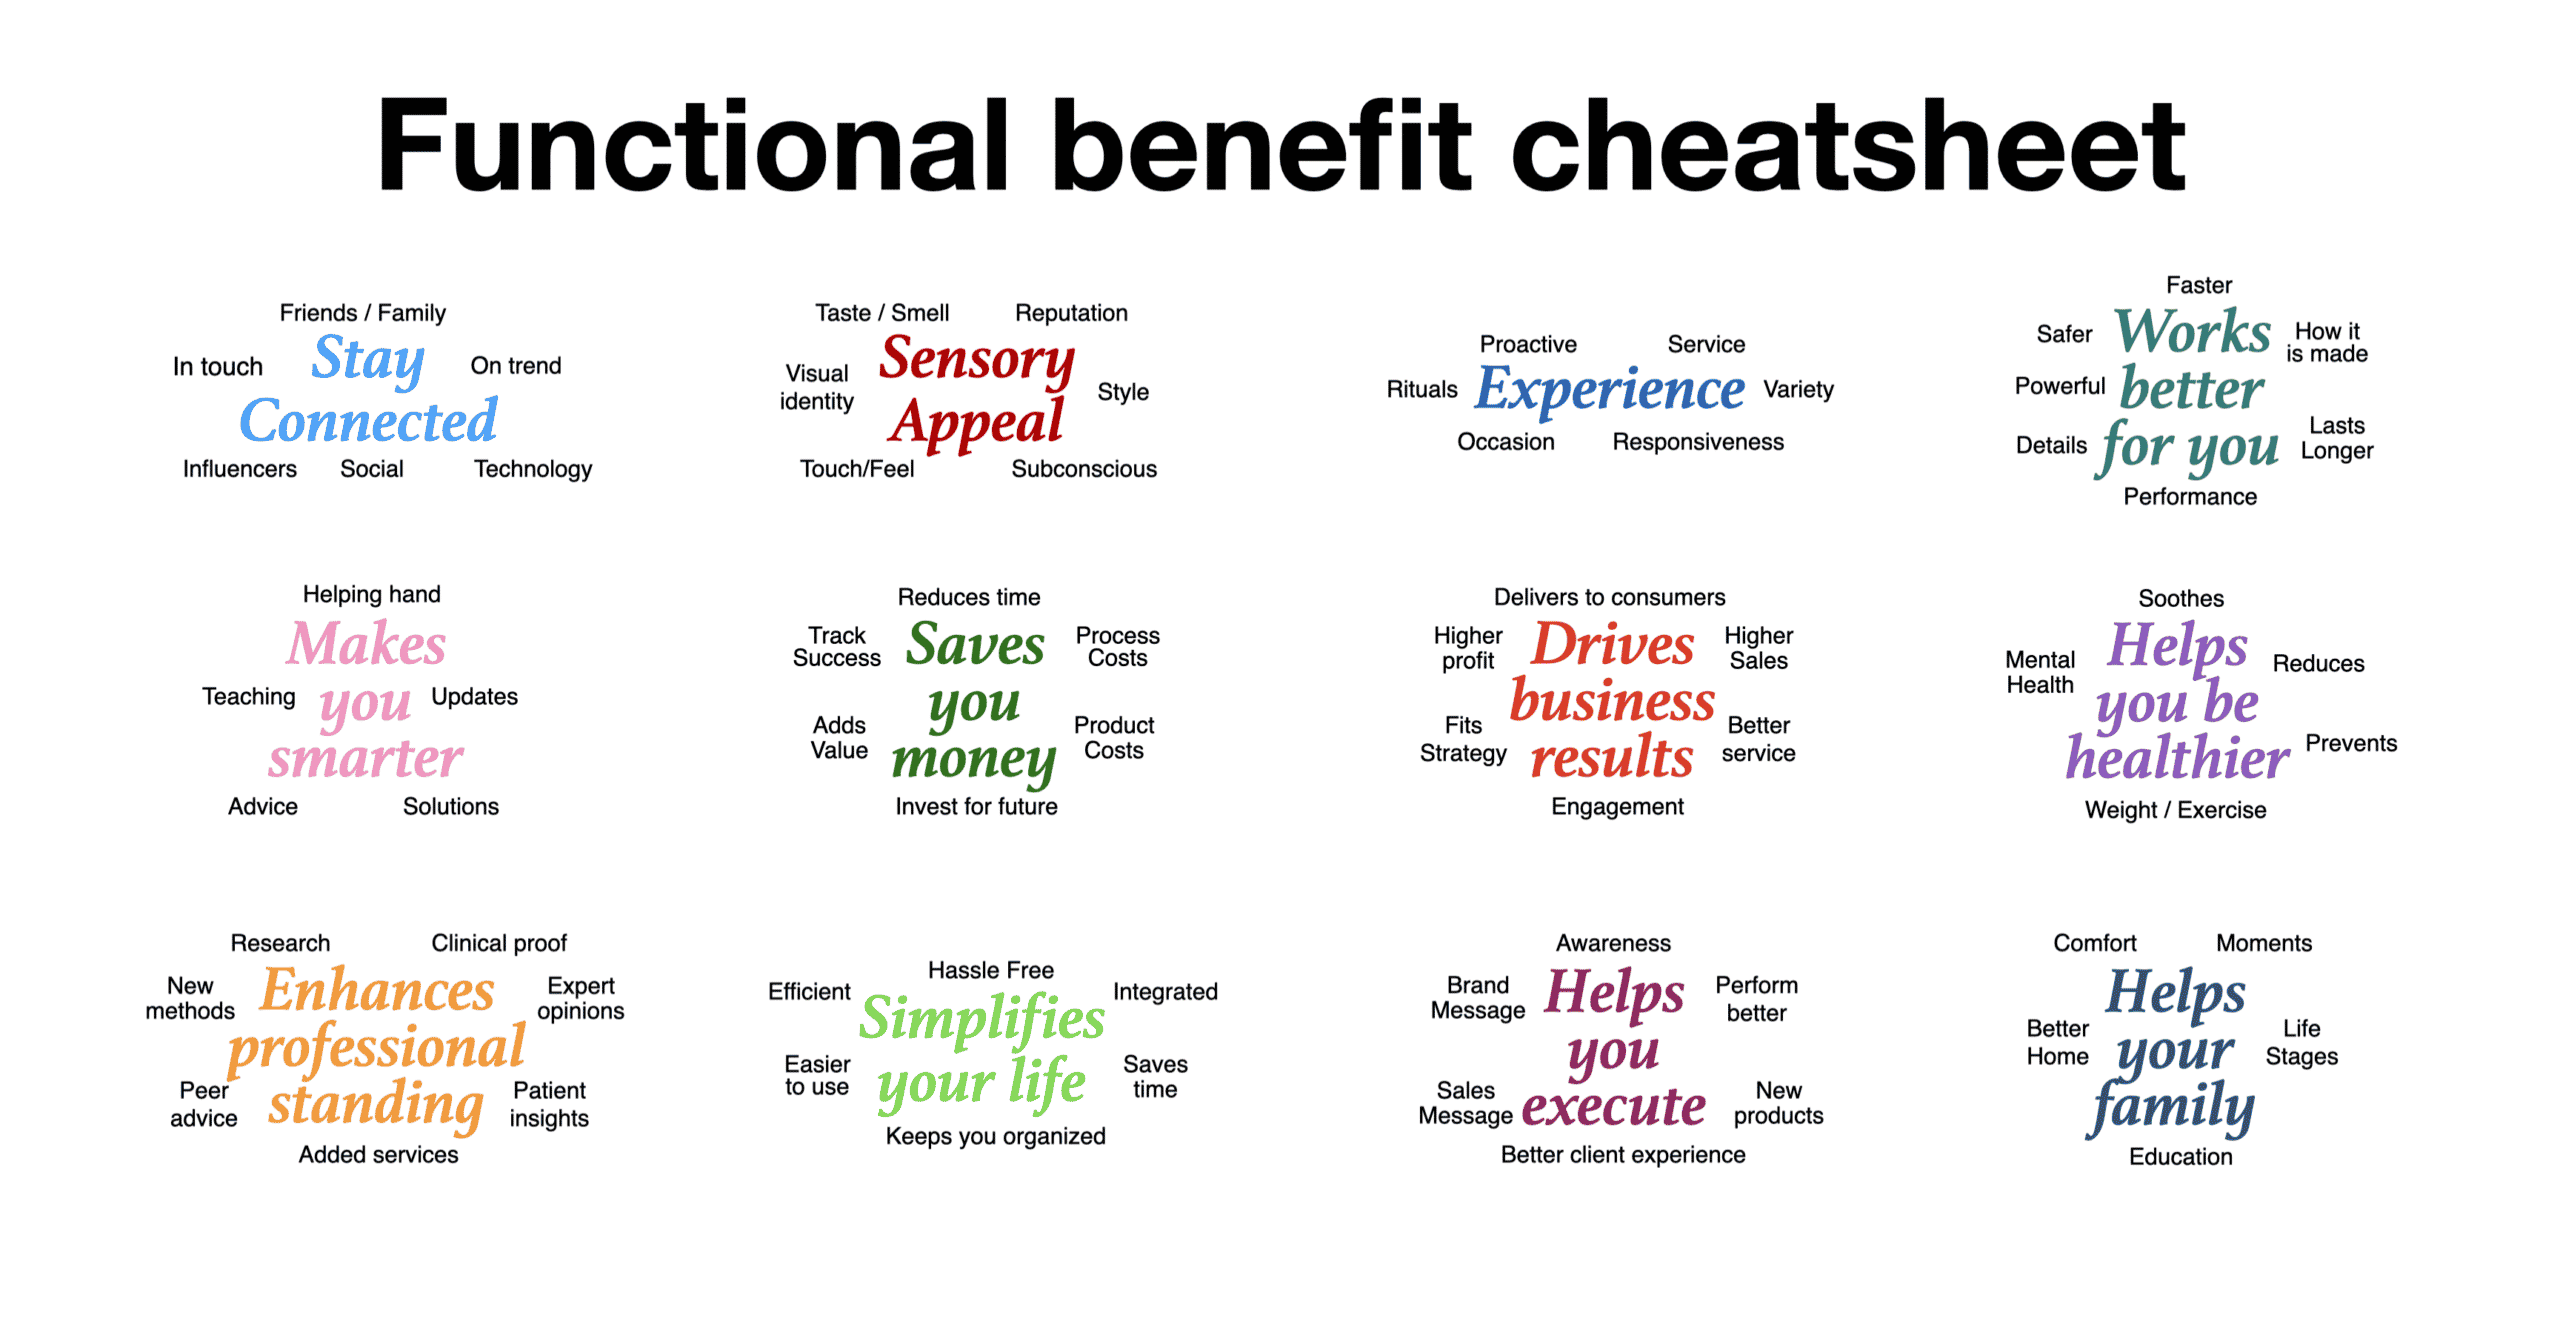 Functional Benefit Cheatsheet to differentiate your brand positioning statement